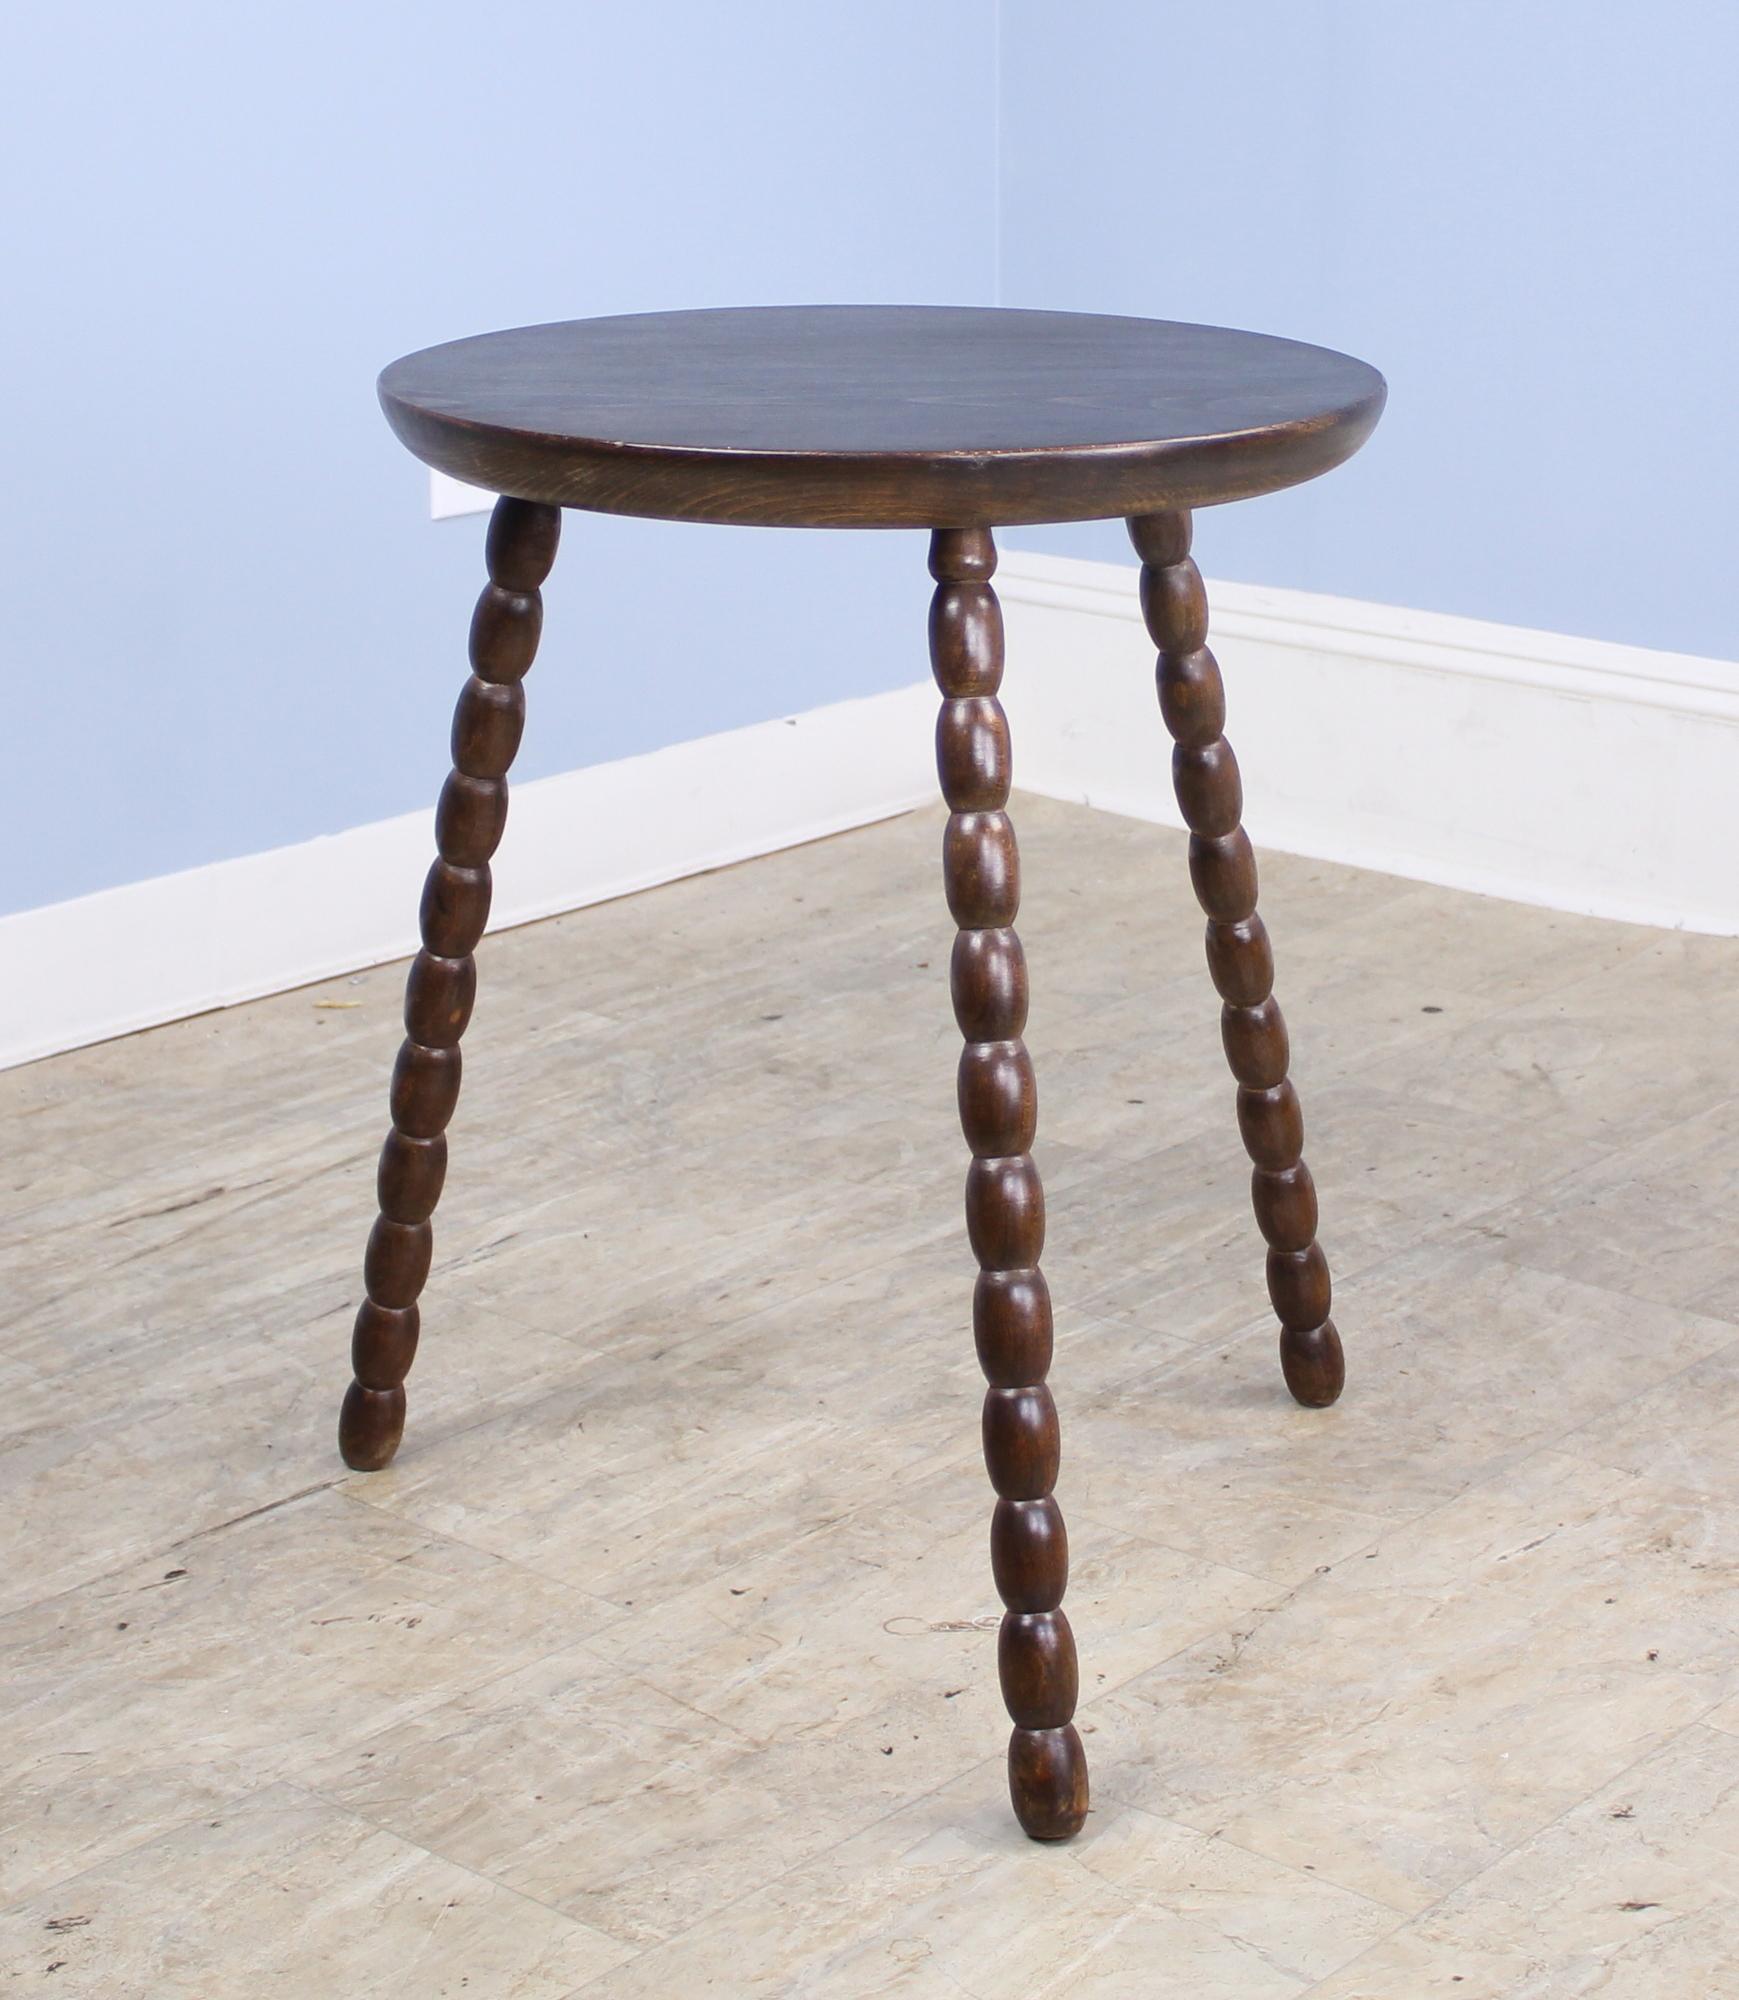 A sleek cricket, lamp, or side table with whimsical bobbin legs. Top has been refinished. Diameter measurement is for the tabletop; there are 22 inches between each leg at the bottom.